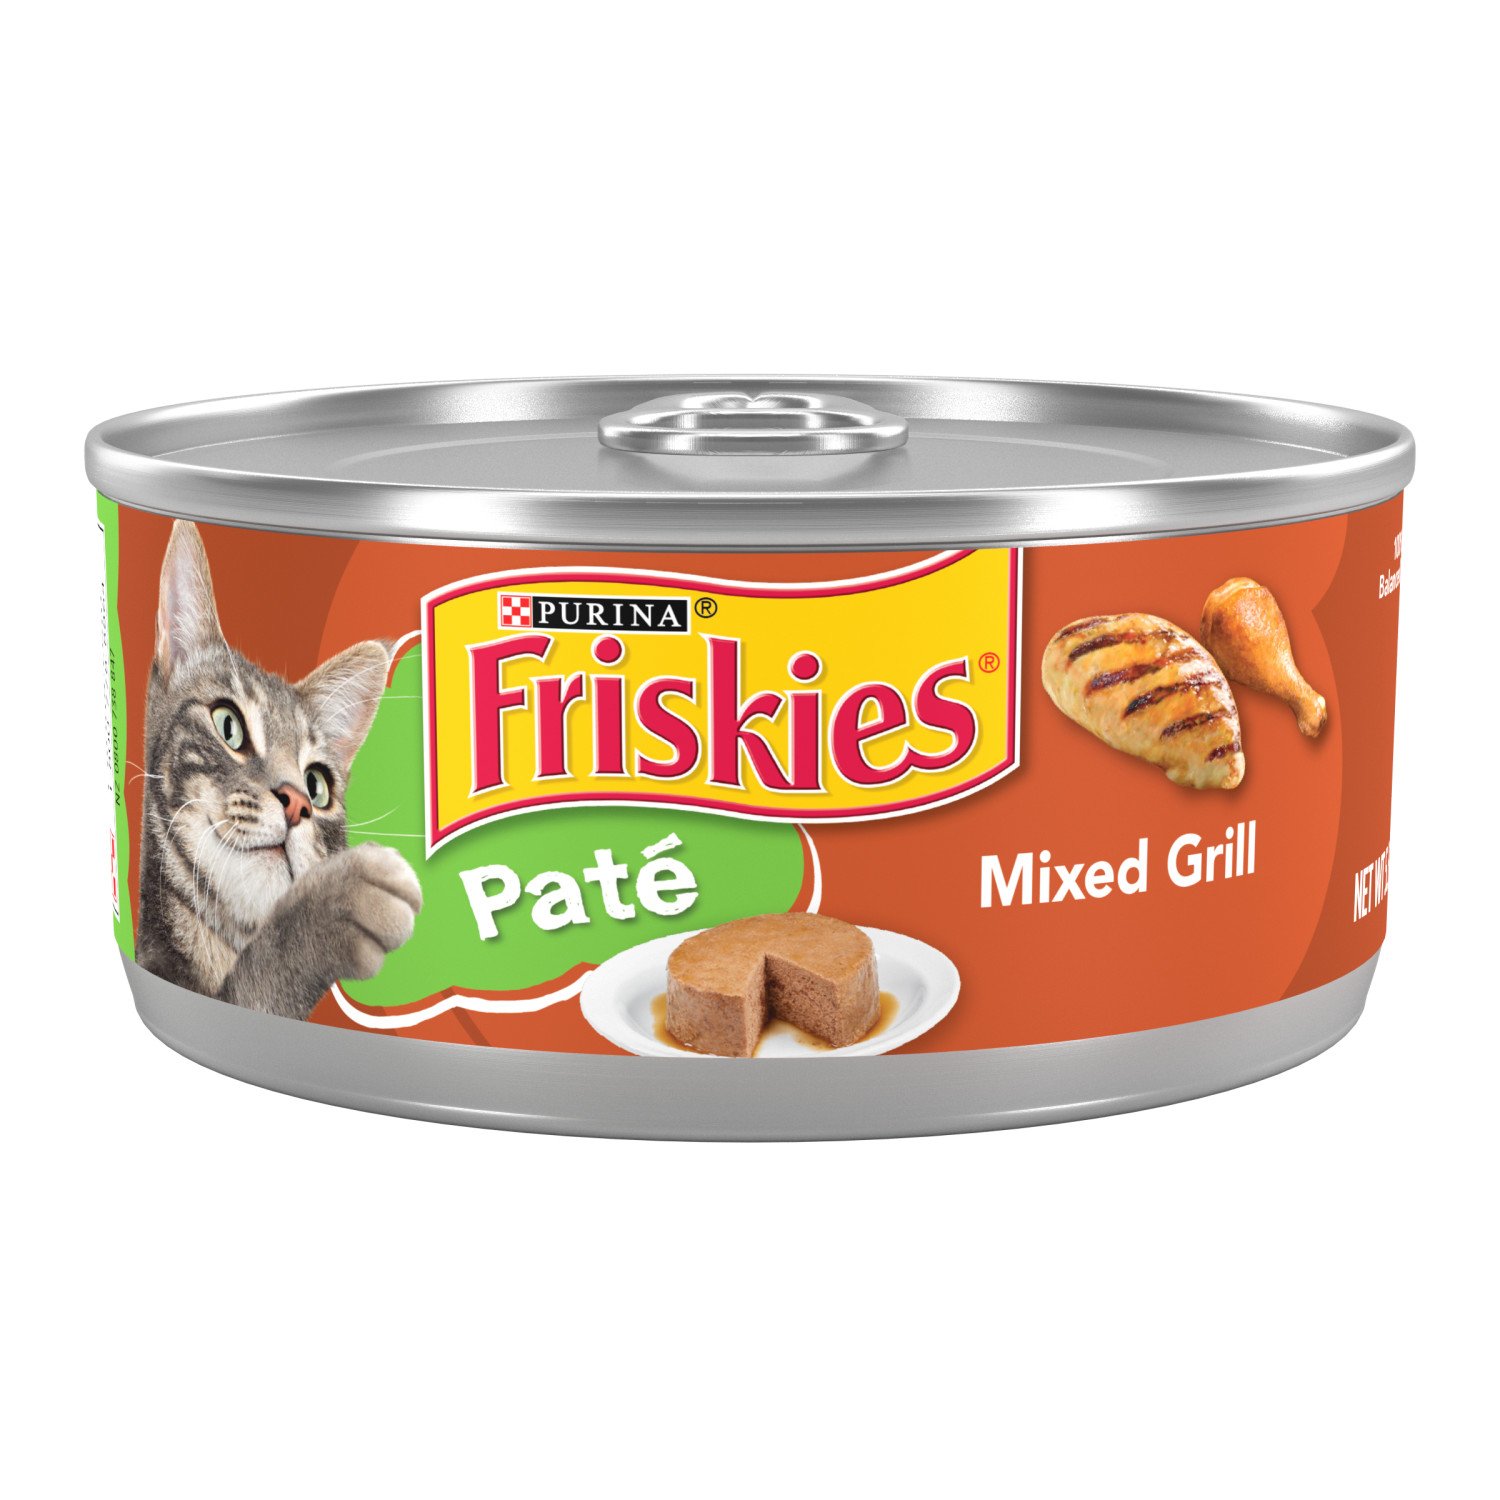 Purina Friskies Pate Mixed Grill Wet Cat Food Shop Cats at HEB